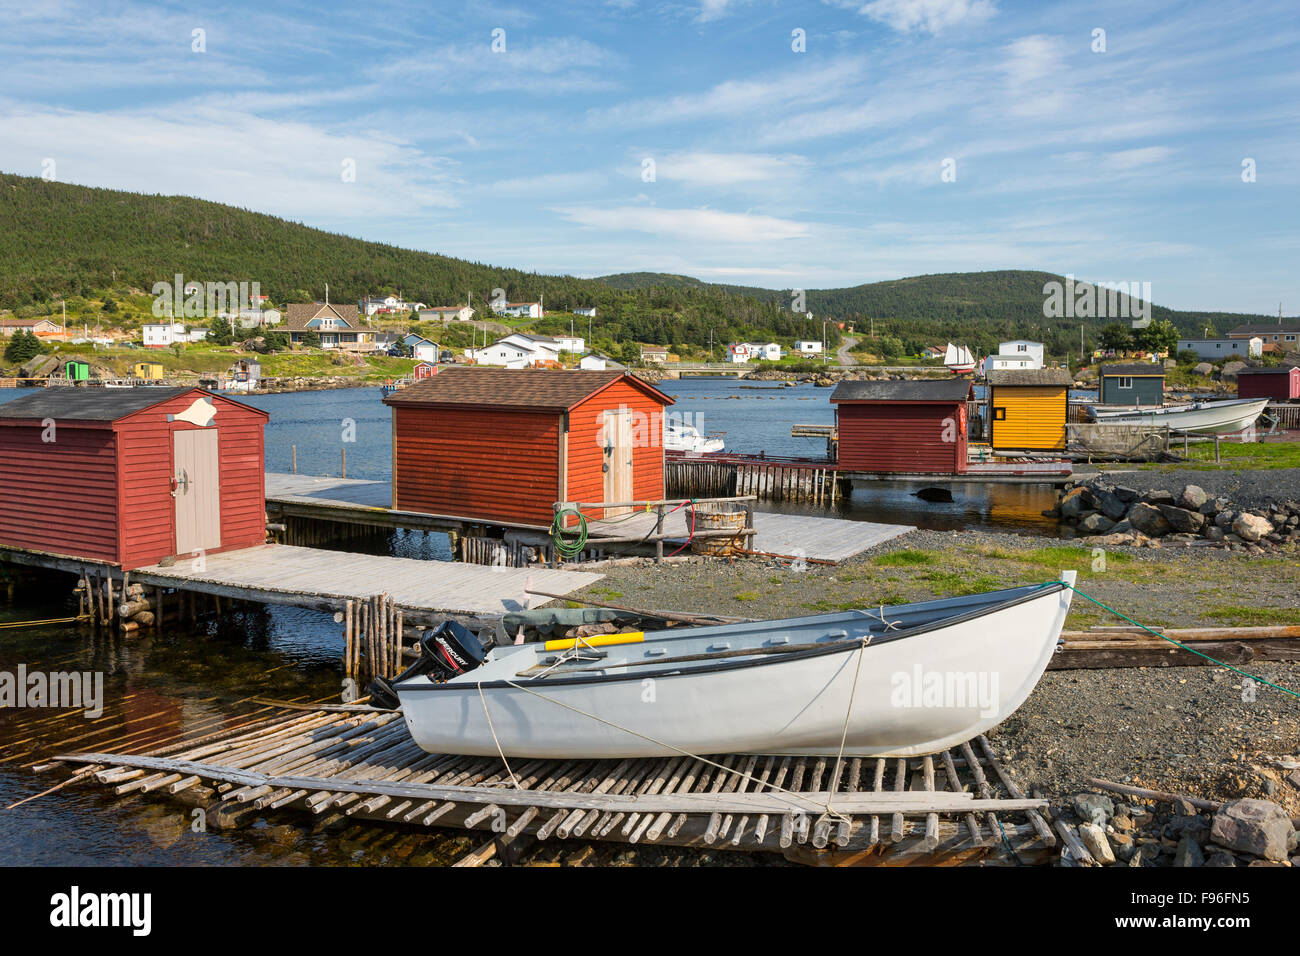 Wooden boat and fishing sheds, New Perlican, Newfoundland, Canada Stock Photo